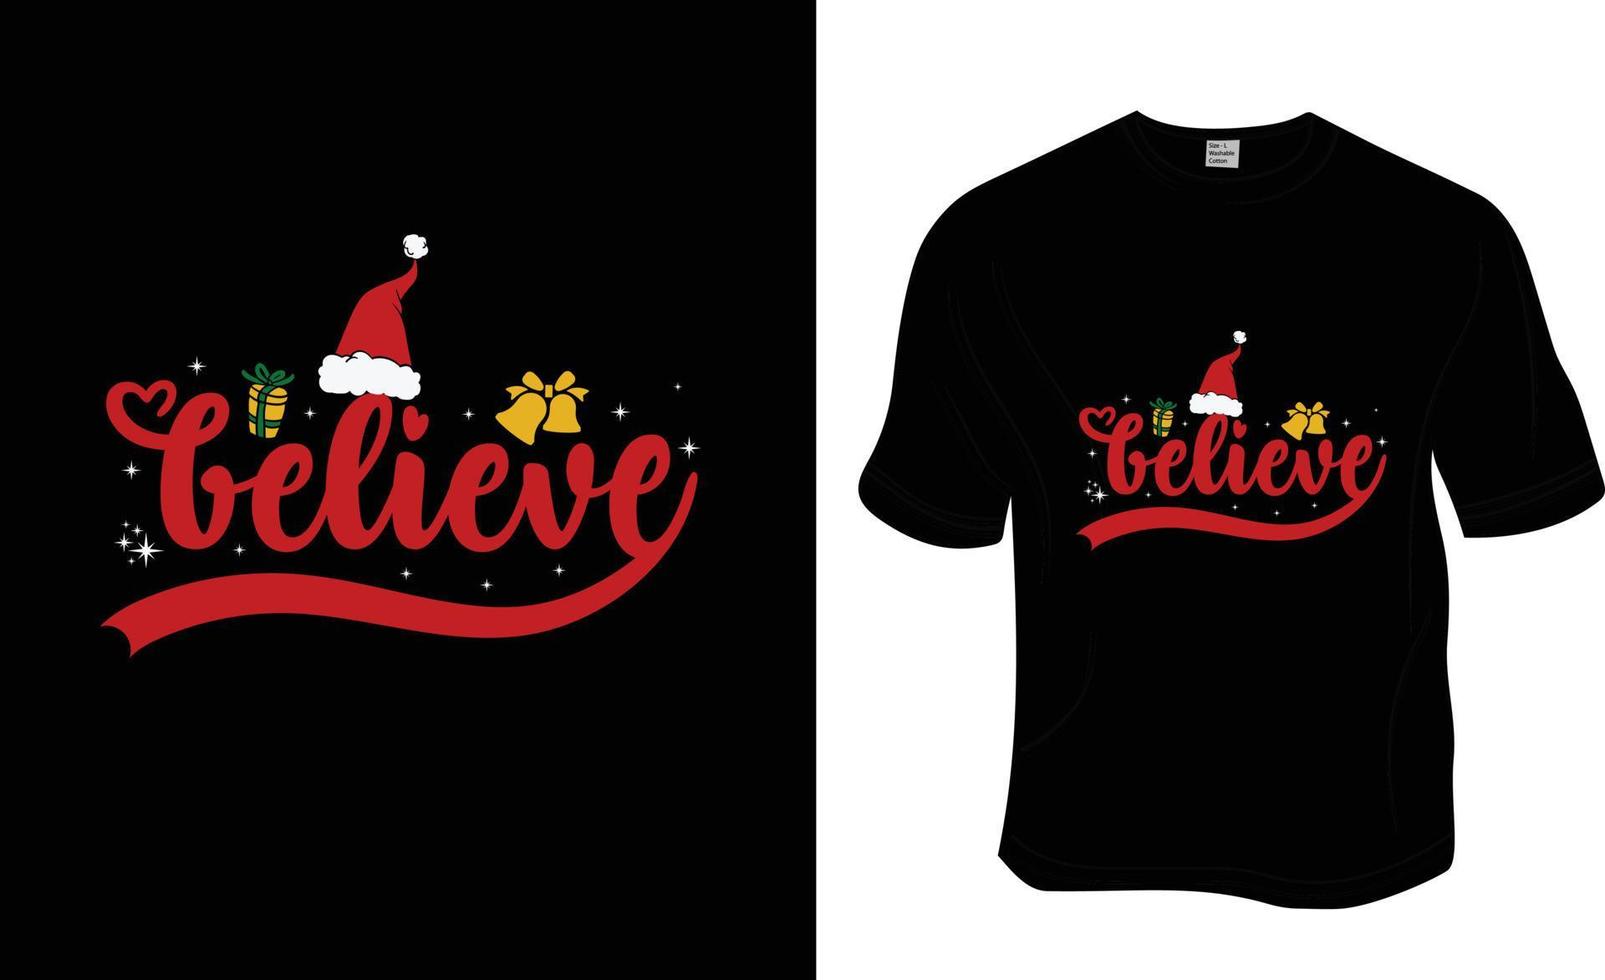 Believe t-shirt design, Ready to print for apparel, poster, and illustration. Modern, simple vector